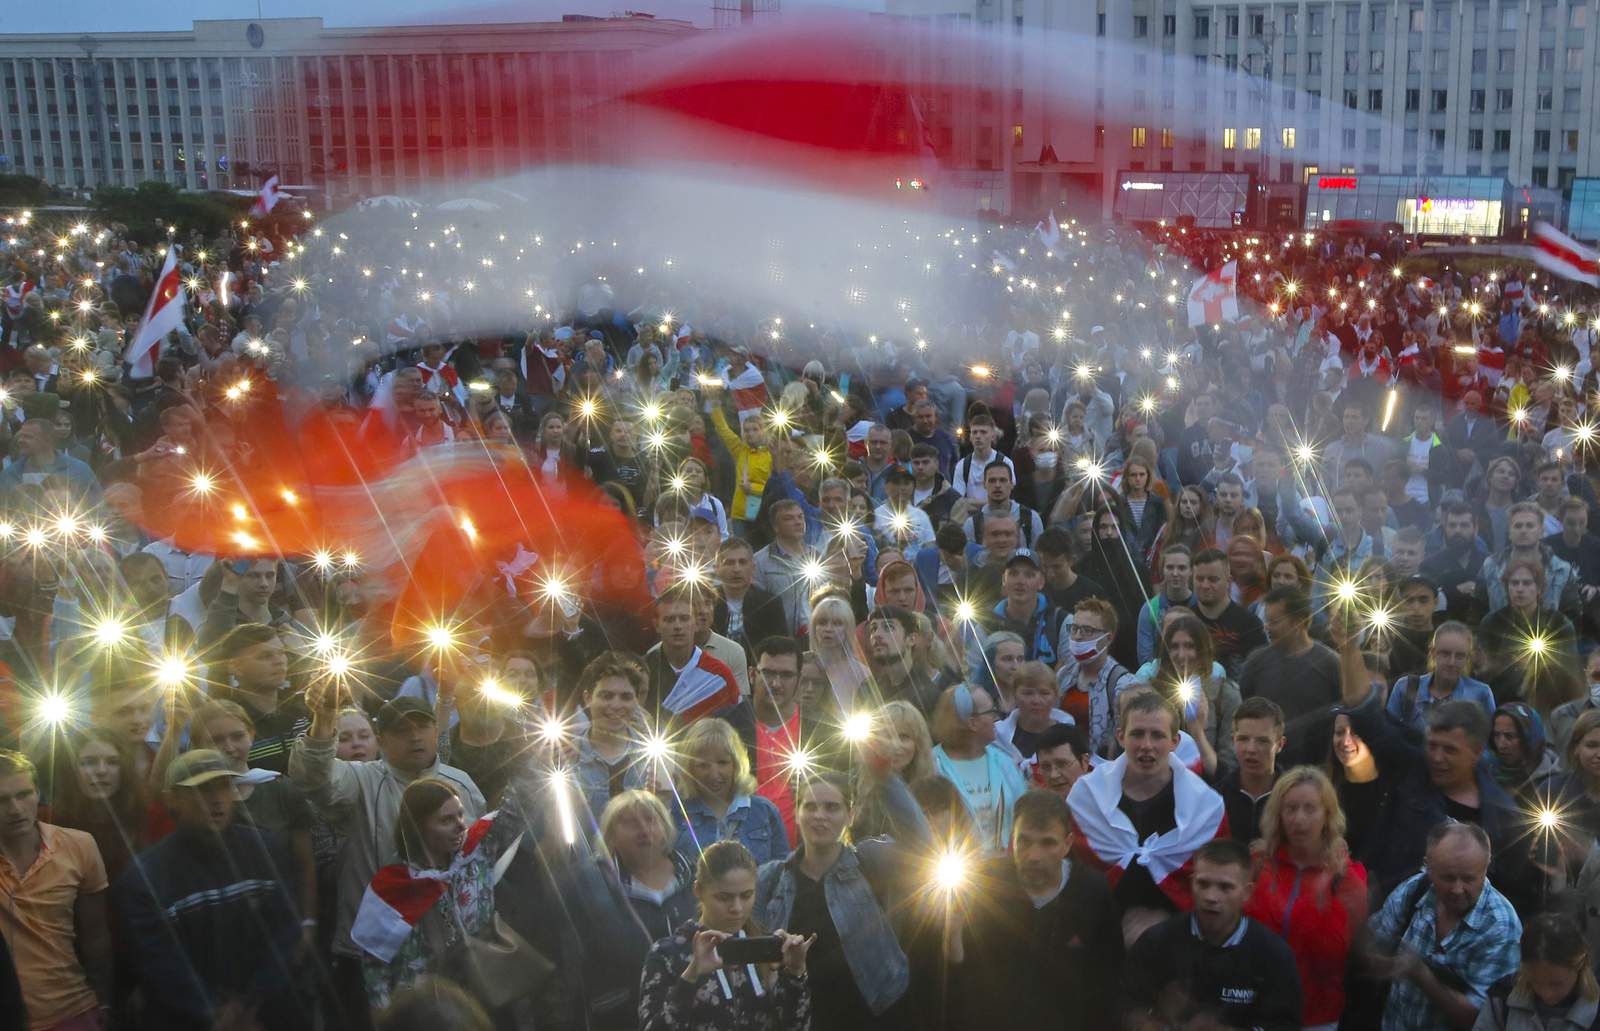 Nearly 3 months after vote, Belarus protests still go strong